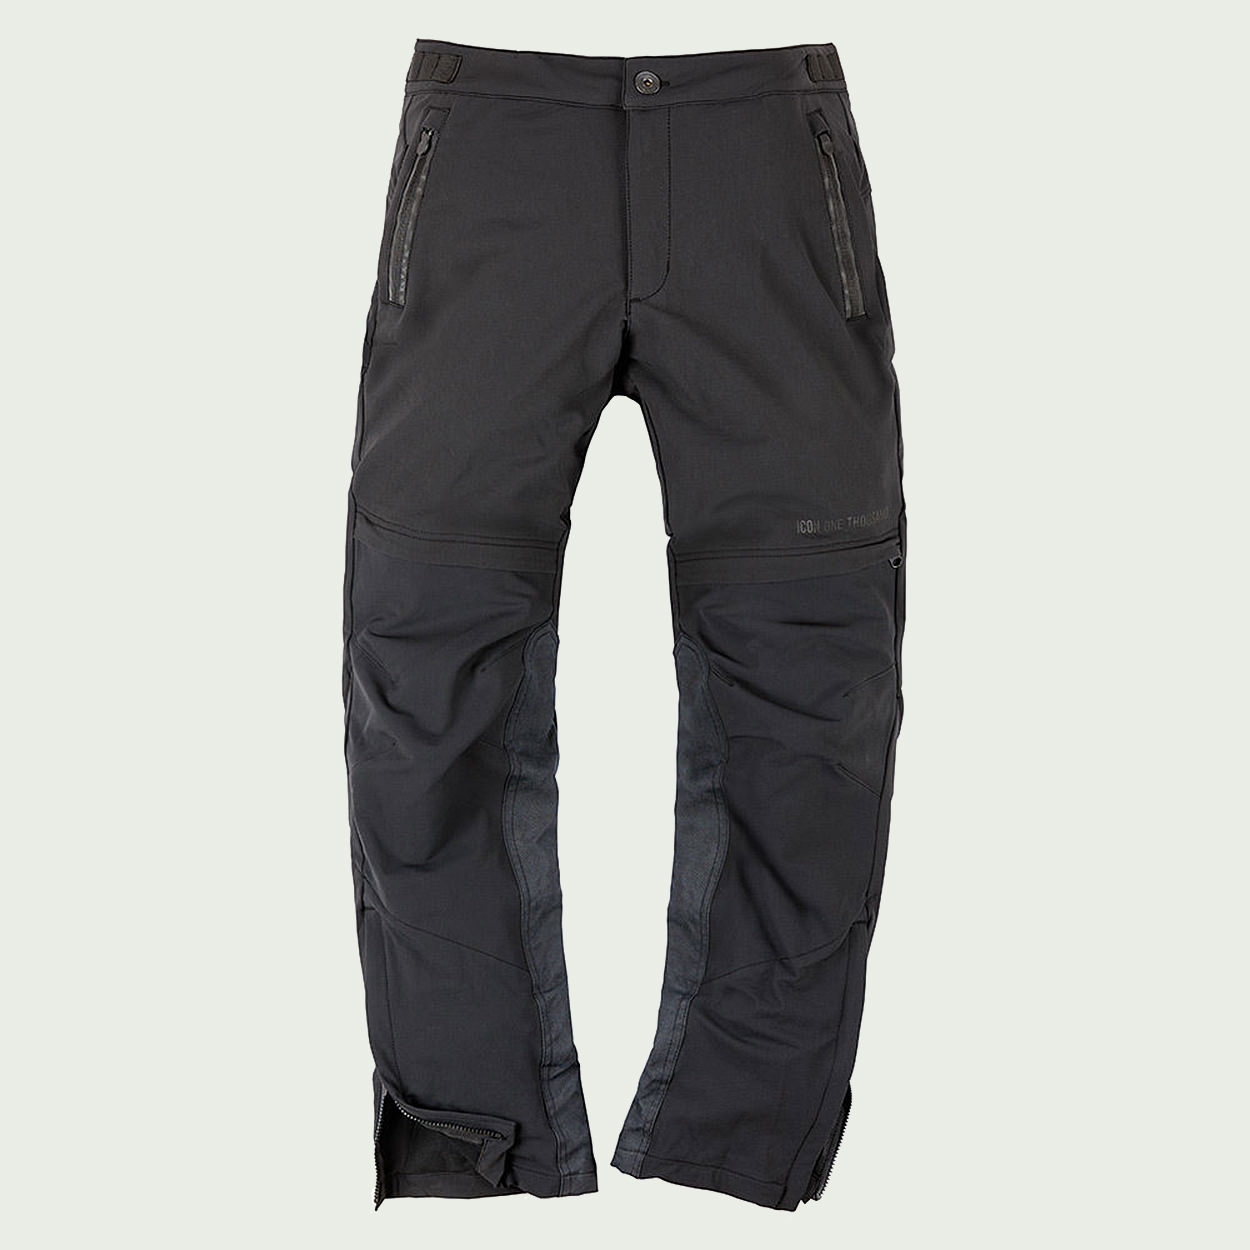 Review: the Icon 1000 Nightbreed pant